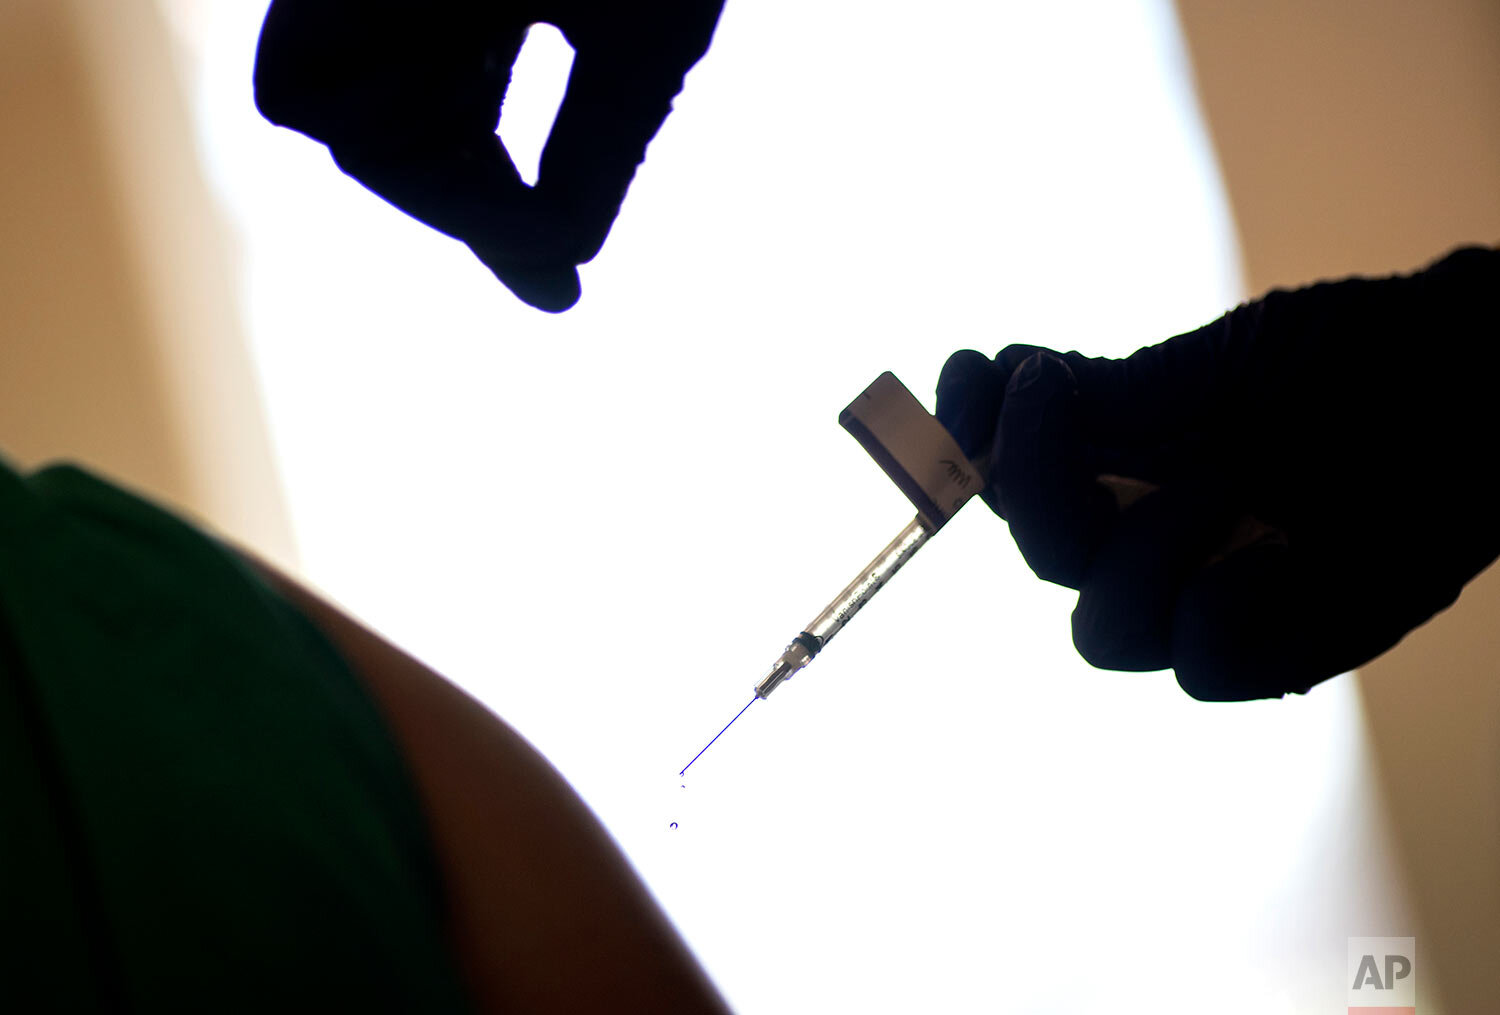  A droplet falls from a syringe after a health care worker was injected with the Pfizer-BioNTech COVID-19 vaccine at Women & Infants Hospital in Providence, R.I., Tuesday, Dec. 15, 2020. (AP Photo/David Goldman) 